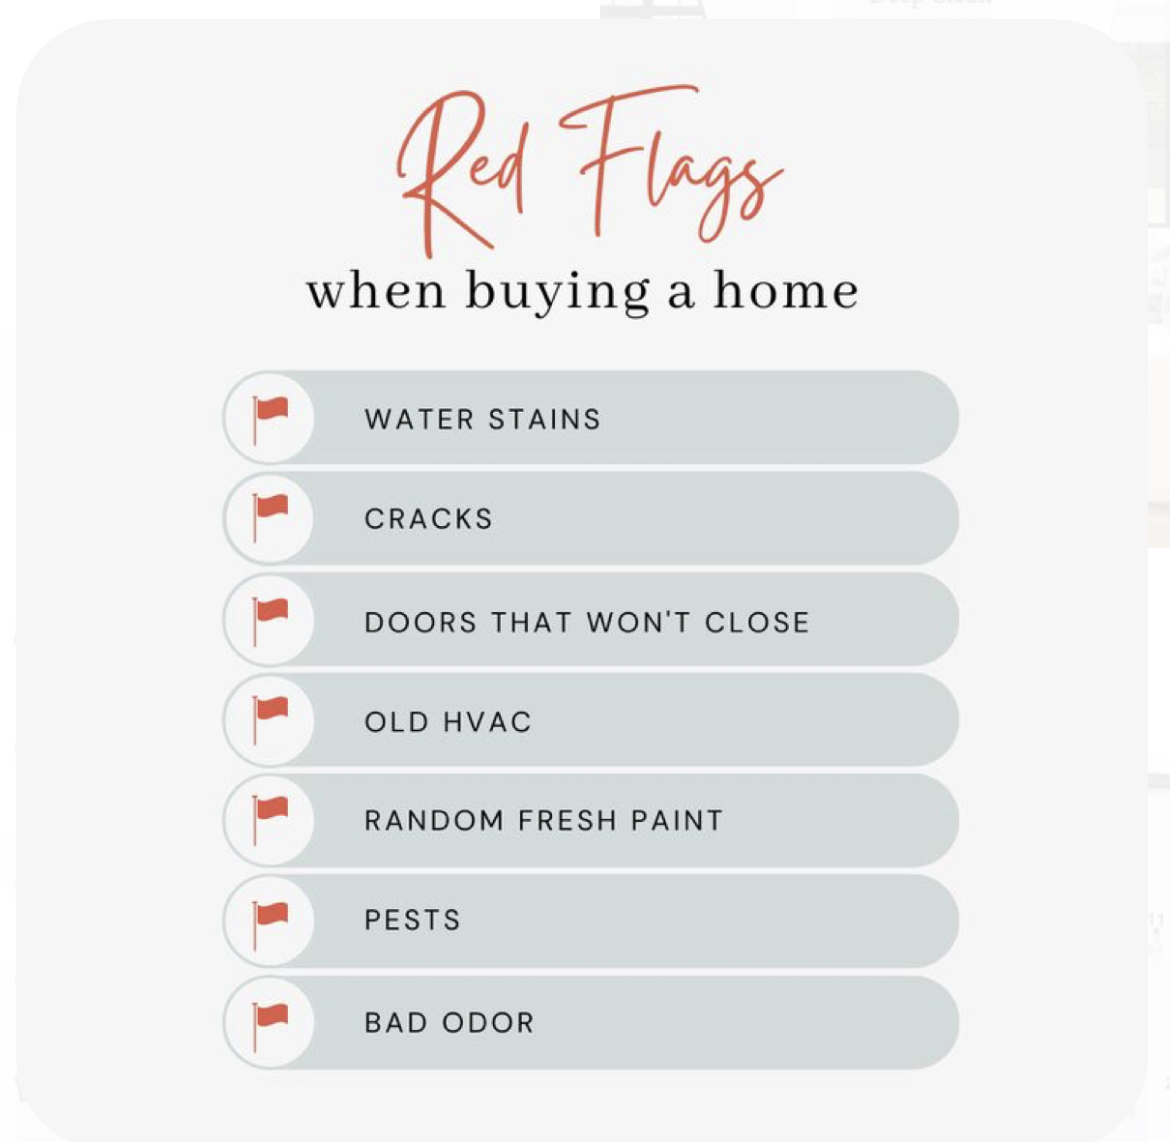 RED FLAGS when buying a home🏡

#buying, #selling, #newhome, #housingmarket, #kw, #kgre, #bestofzillow, #premieragent, #toprealestateteam, #whoyouworkwithmatters